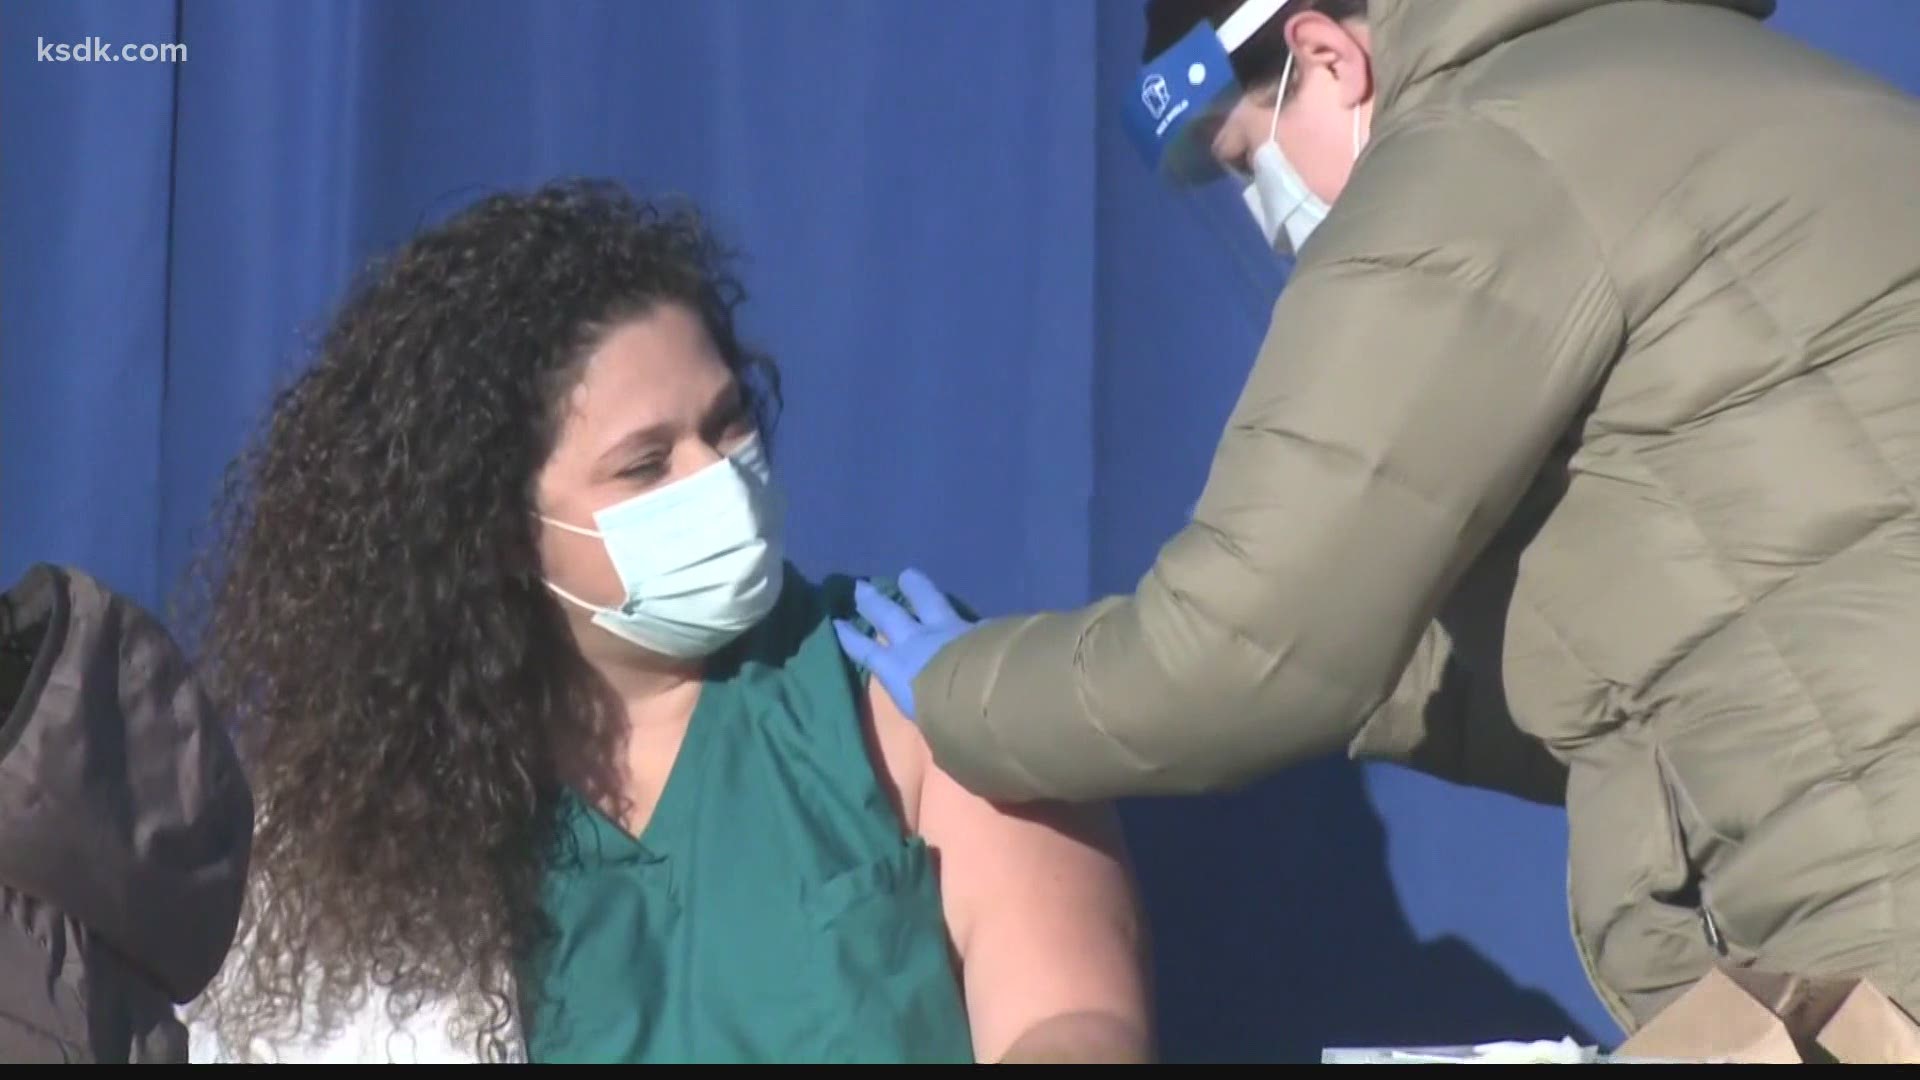 More than 2.4 million vaccinations were administered across the country Sunday.